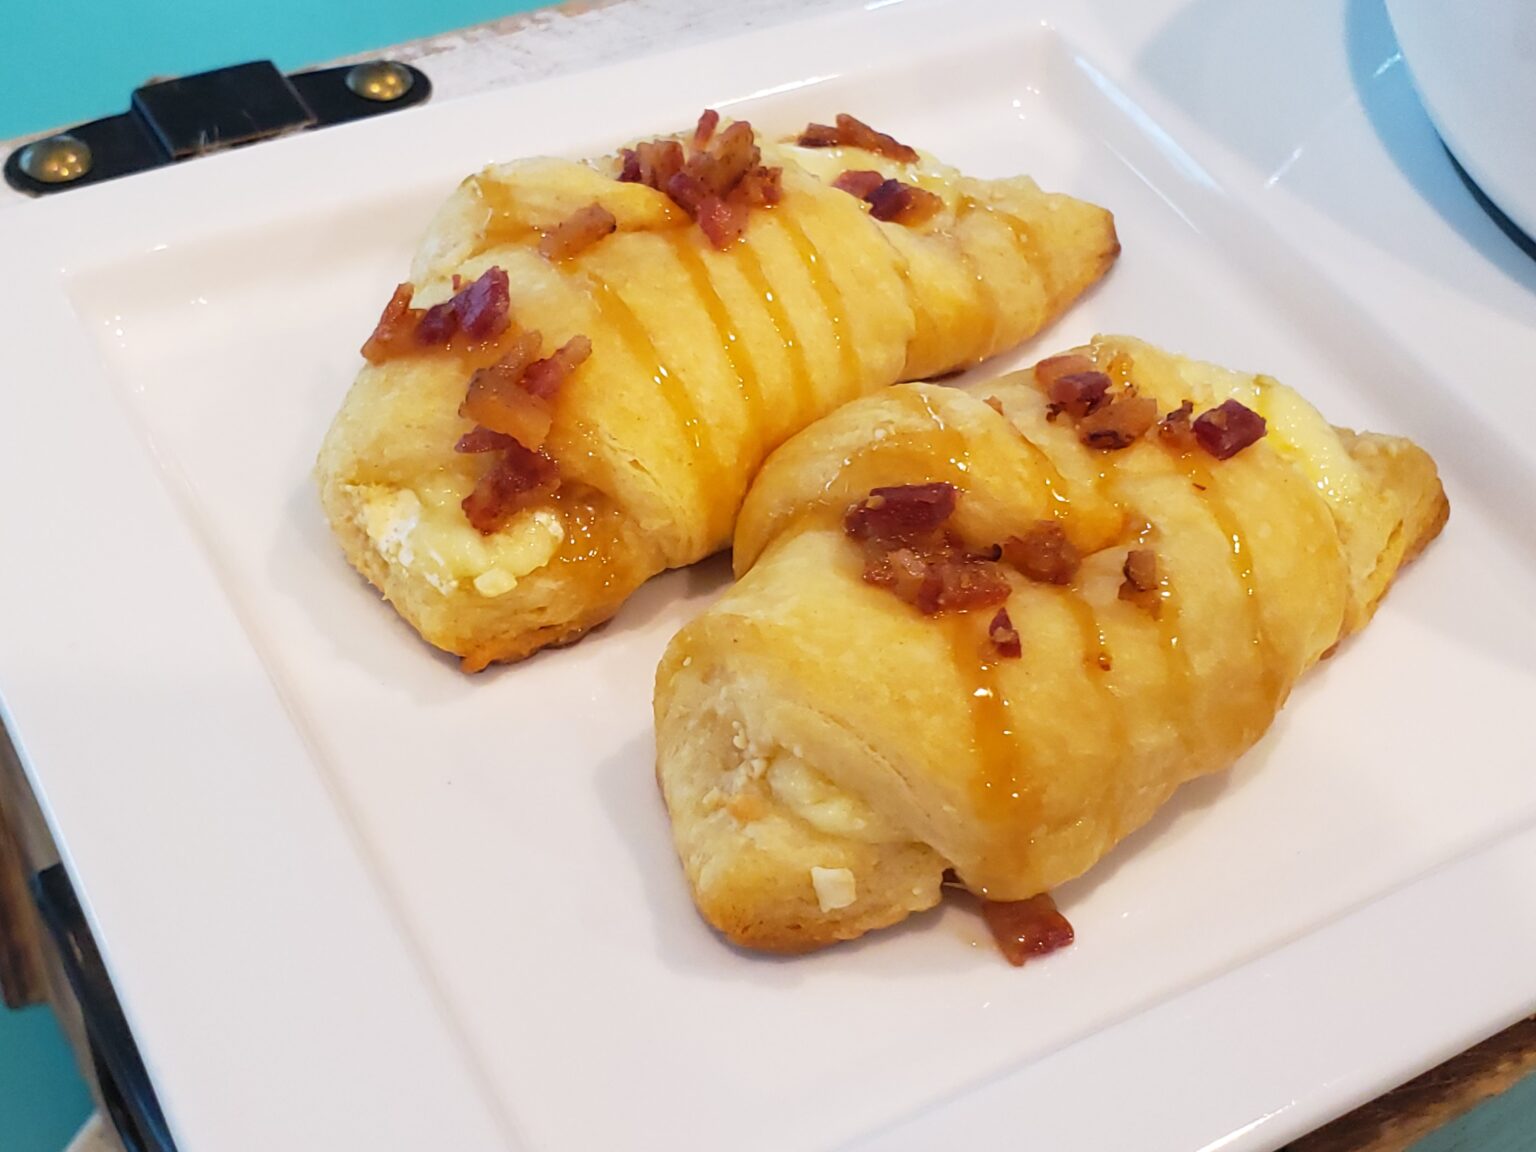 brie cressant rolls with bacon and caramel